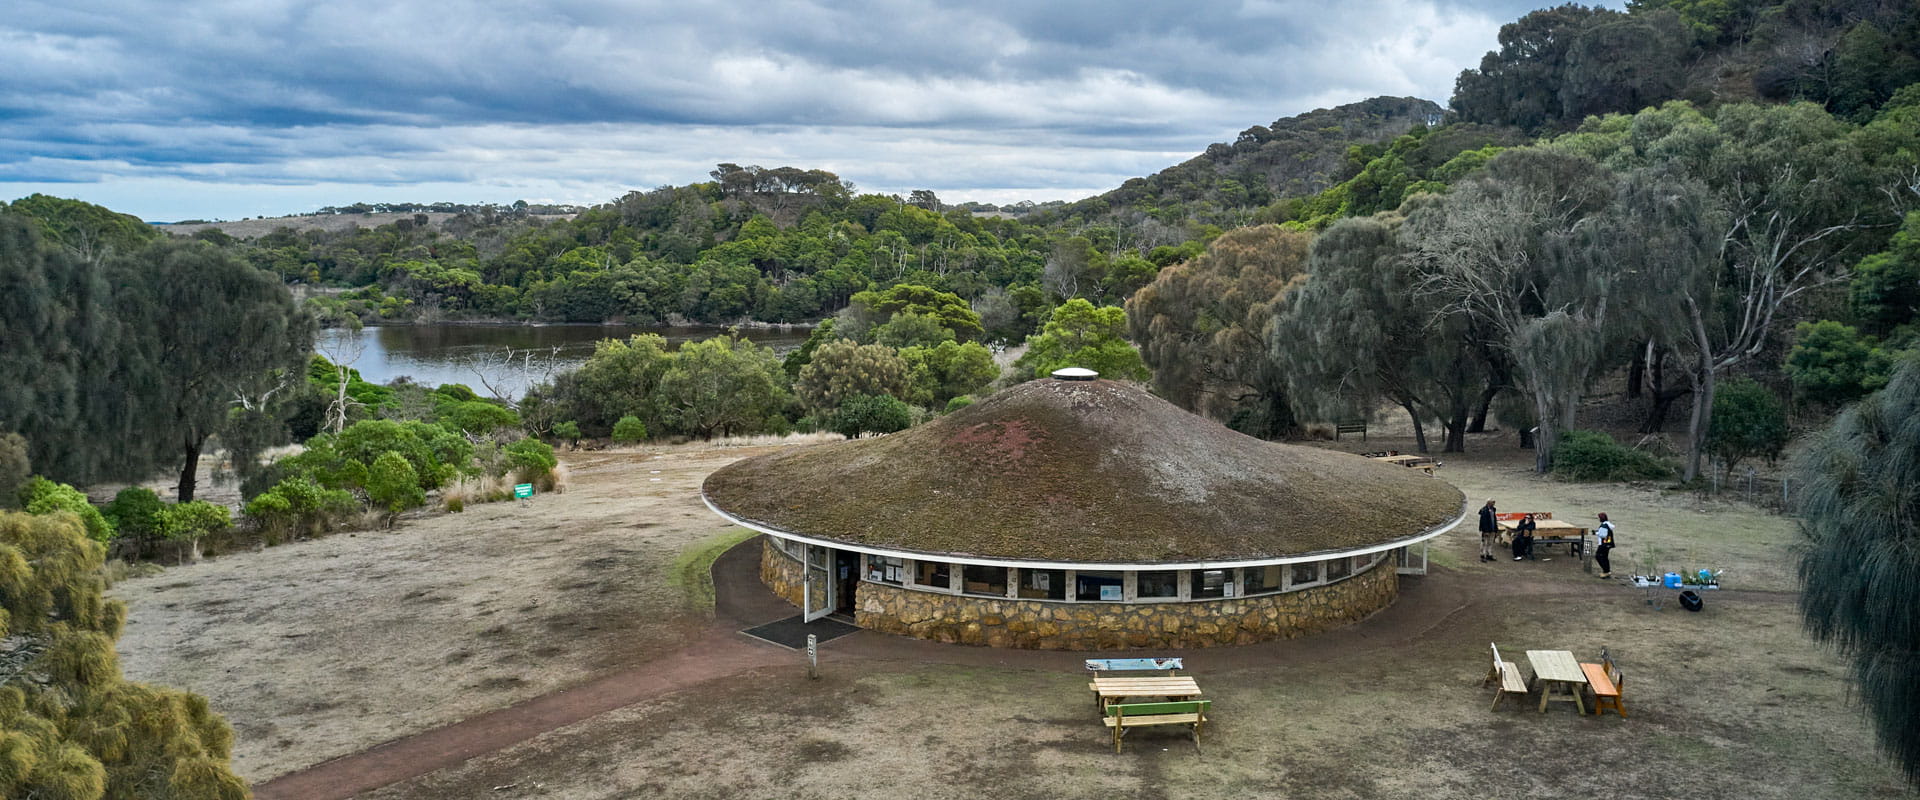 A round mid-century building stands in a beautiful green valley landscape. A body of water in the background. 